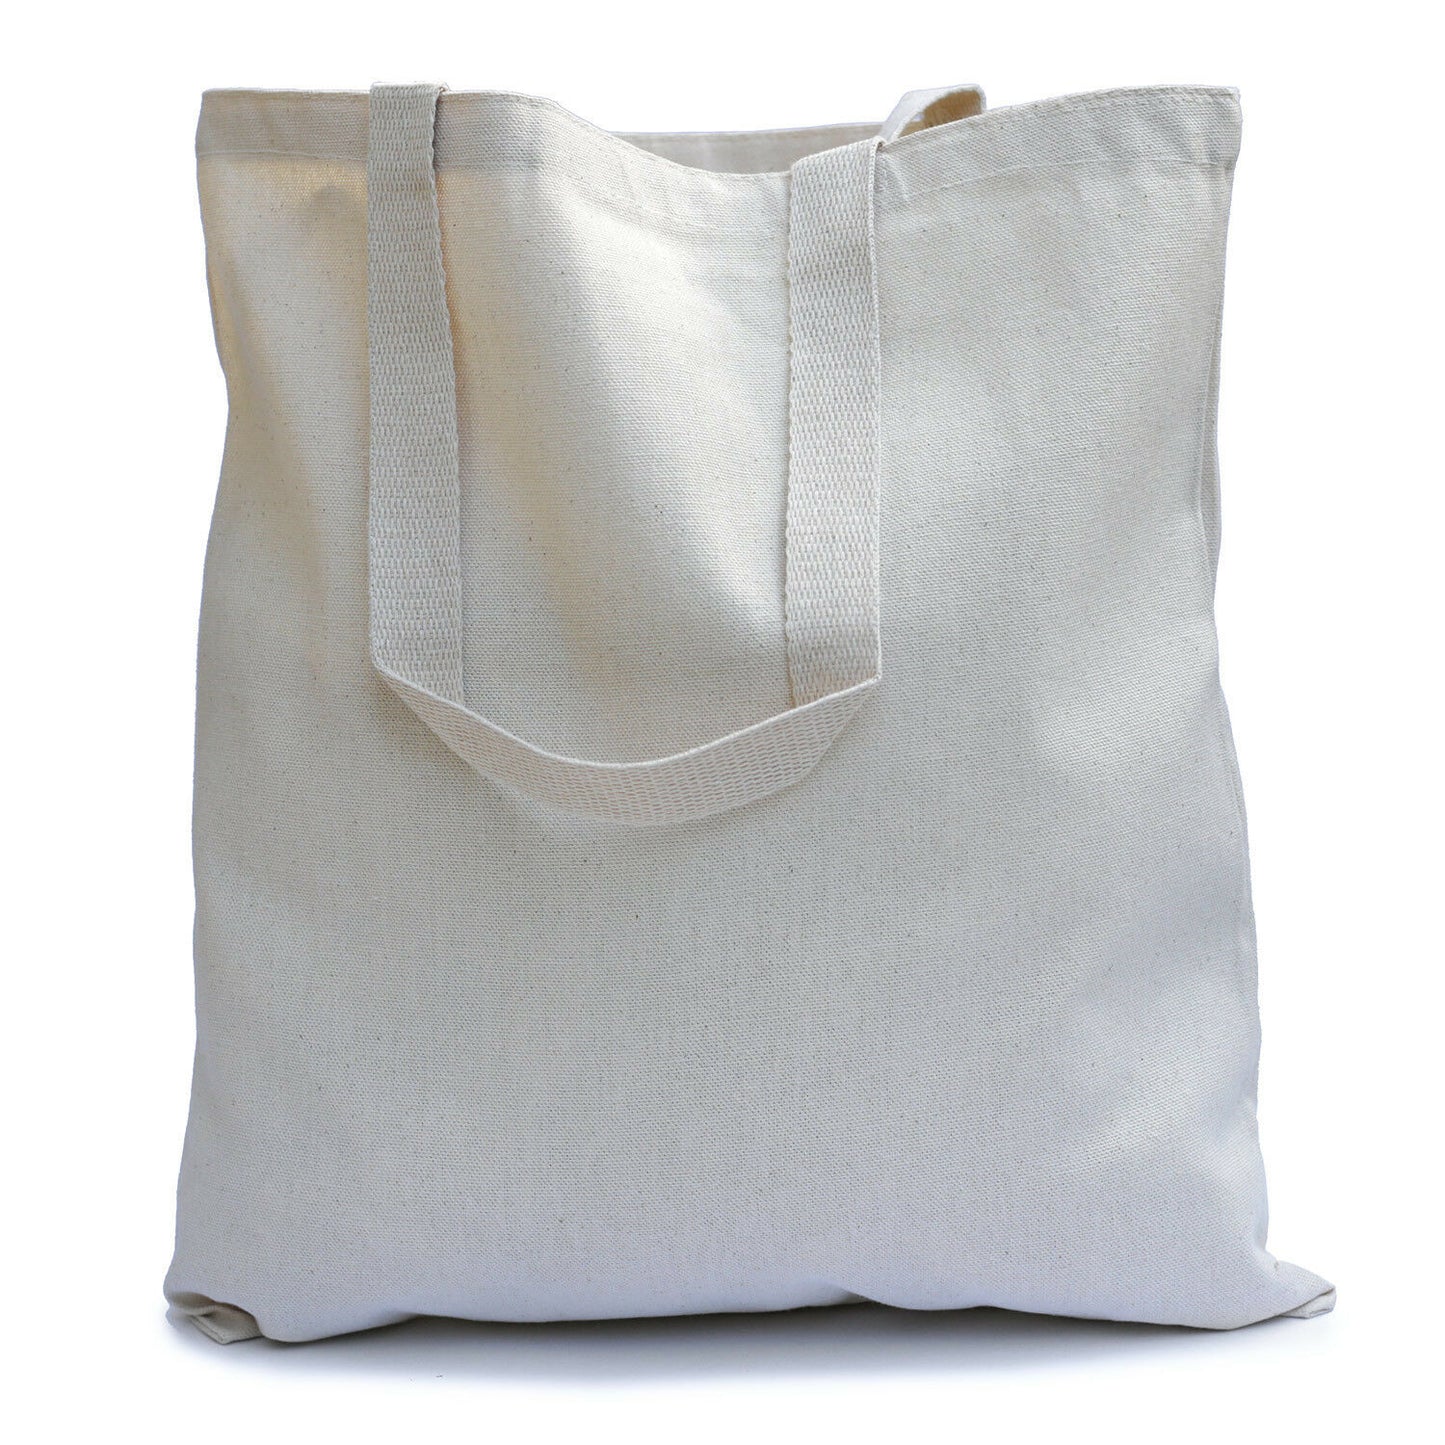 Wholesale Plain Heavy Duty Canvas Tote Bags with Bottom Gusset, Everyday Totes Bulk